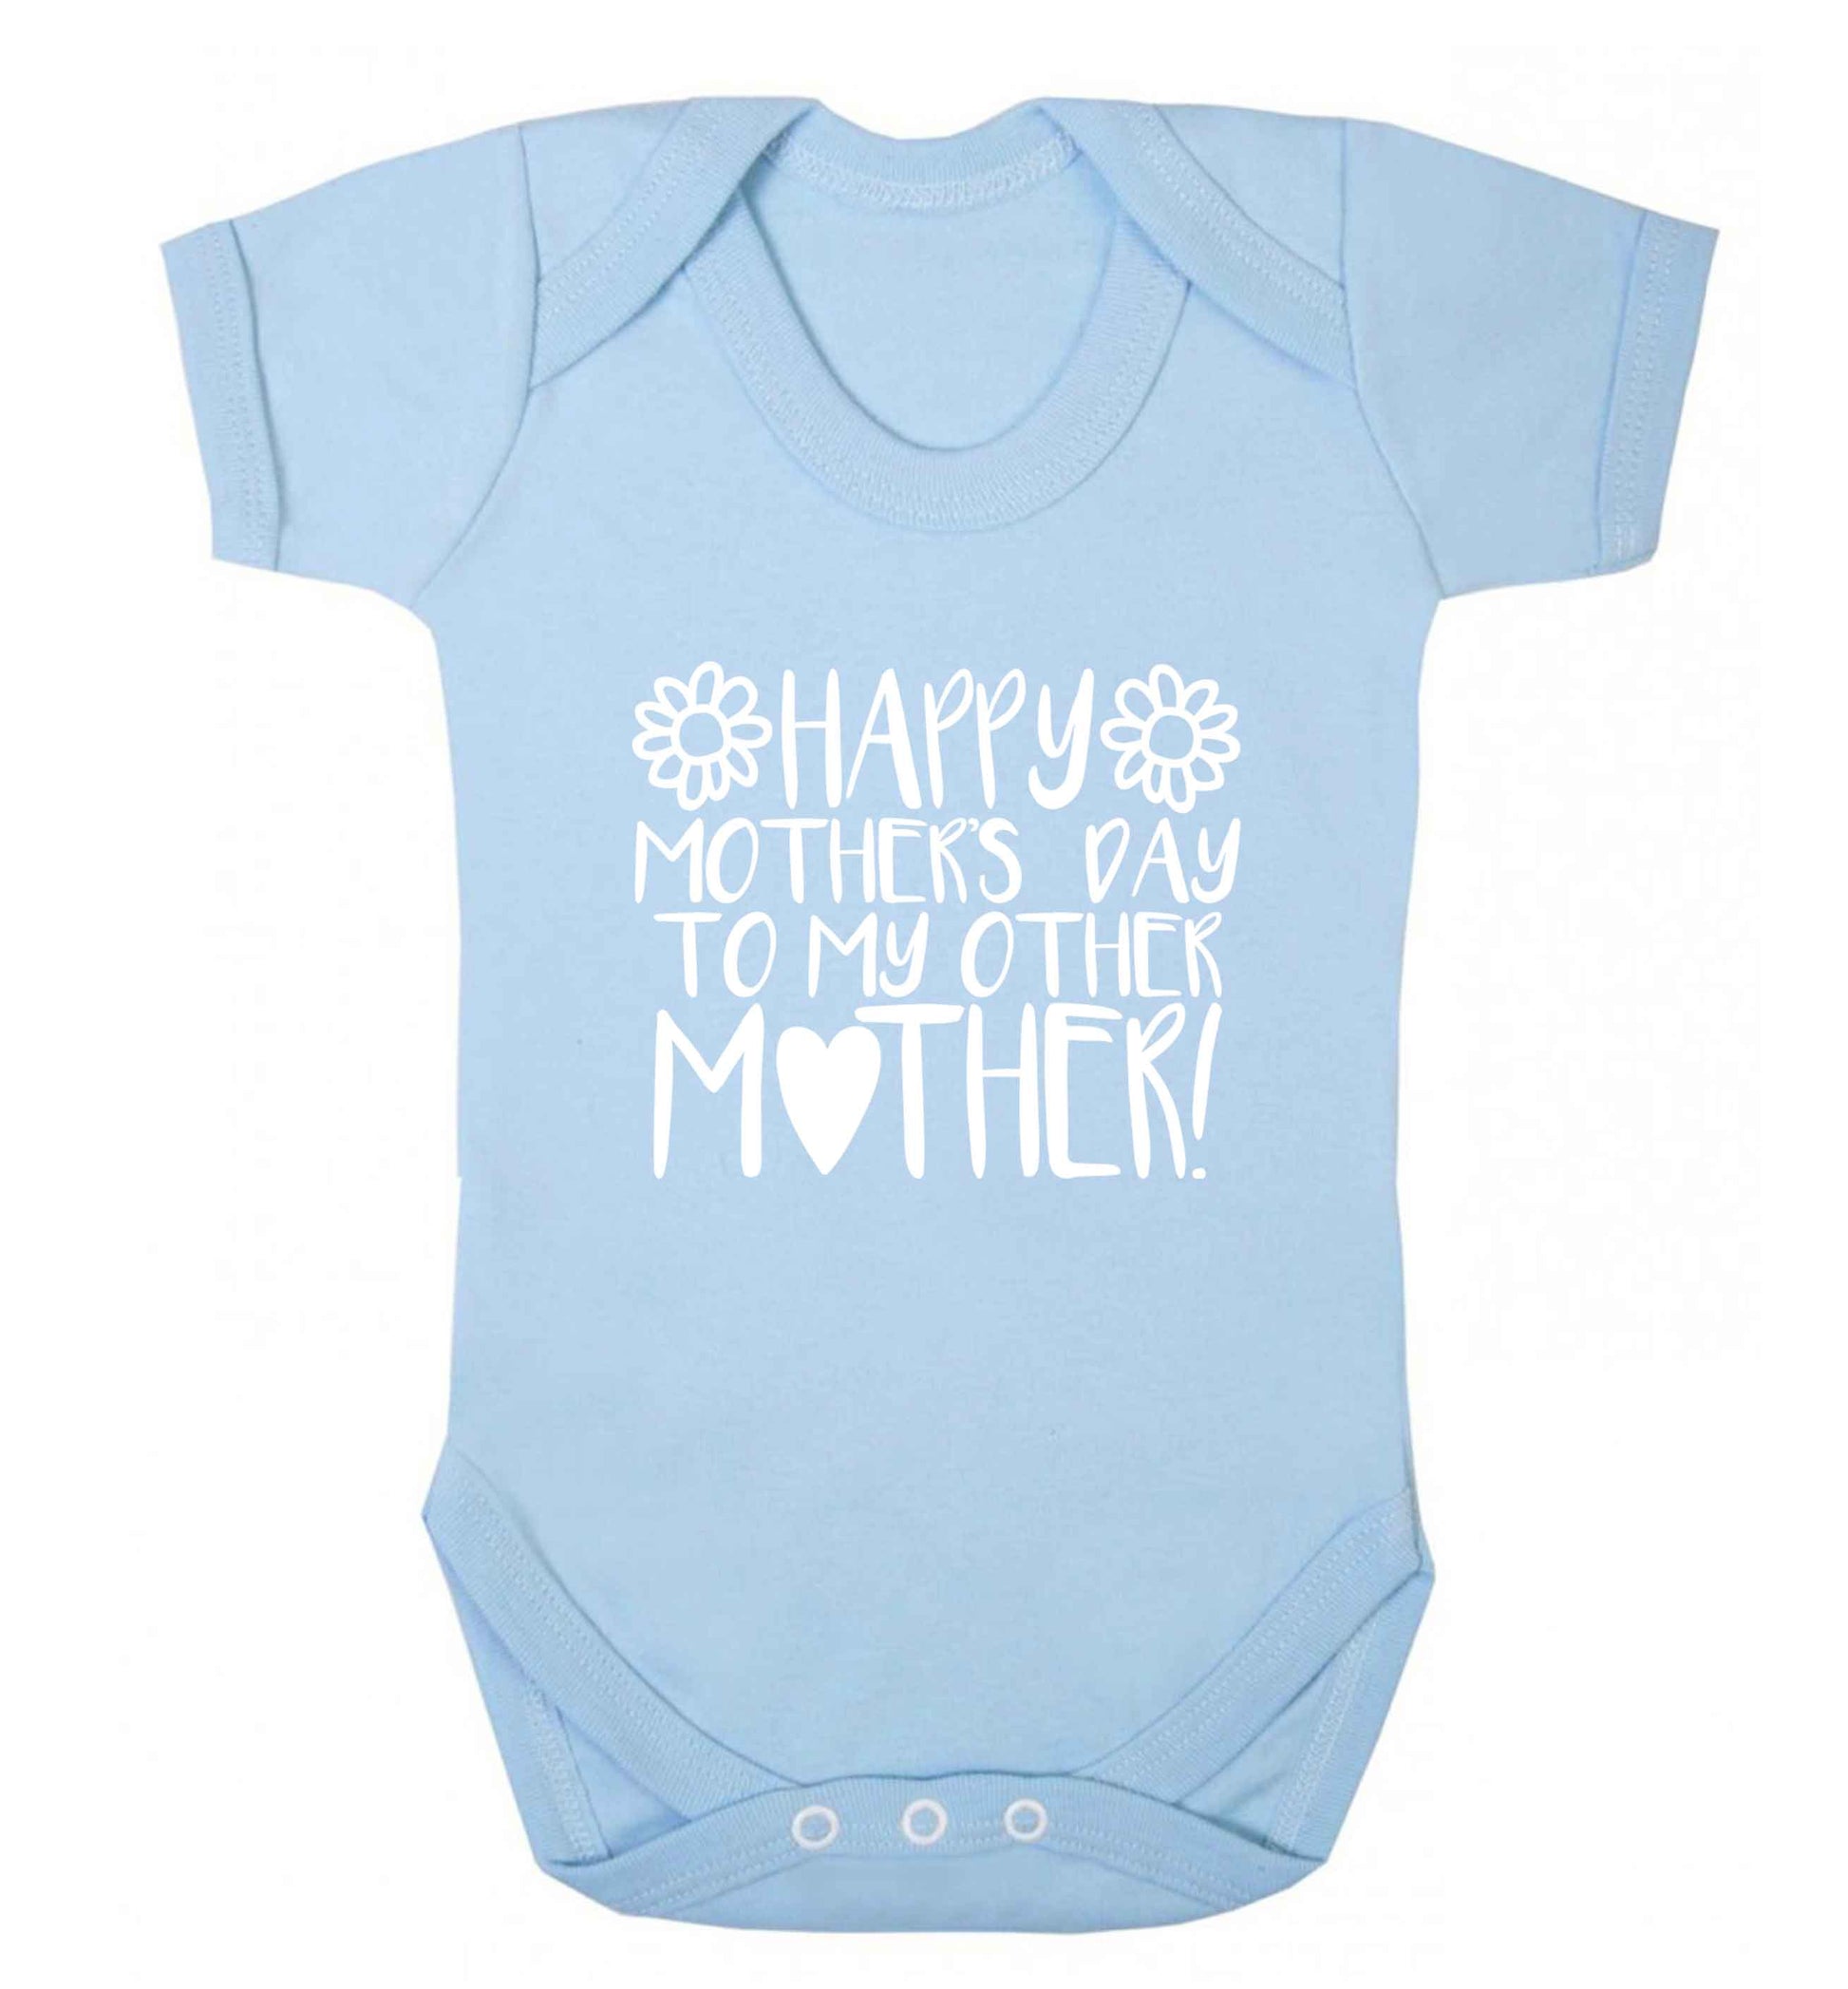 Happy mother's day to my other mother baby vest pale blue 18-24 months